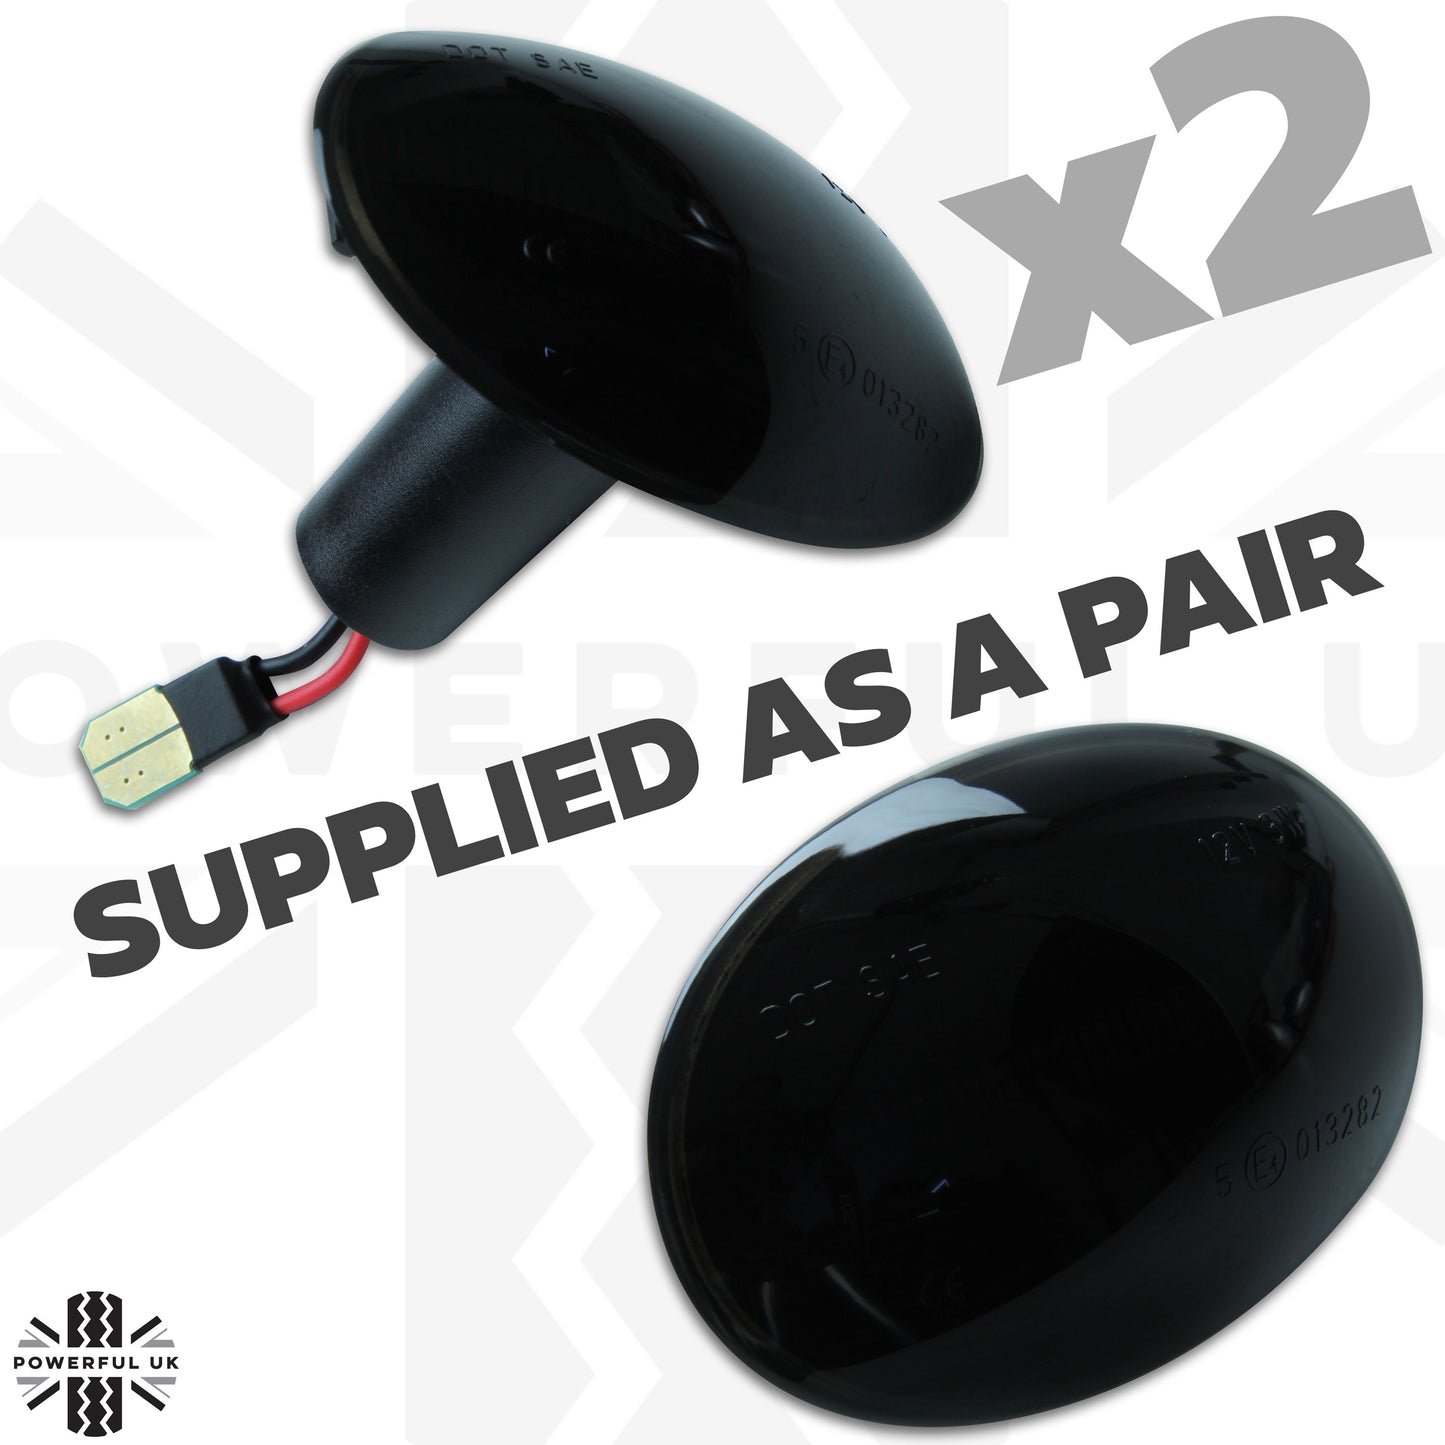 Side Repeaters (Pair) - LED - Smoked - Dynamic Sweep - for BMW Mini (R55,R56,R57,R58,R59)